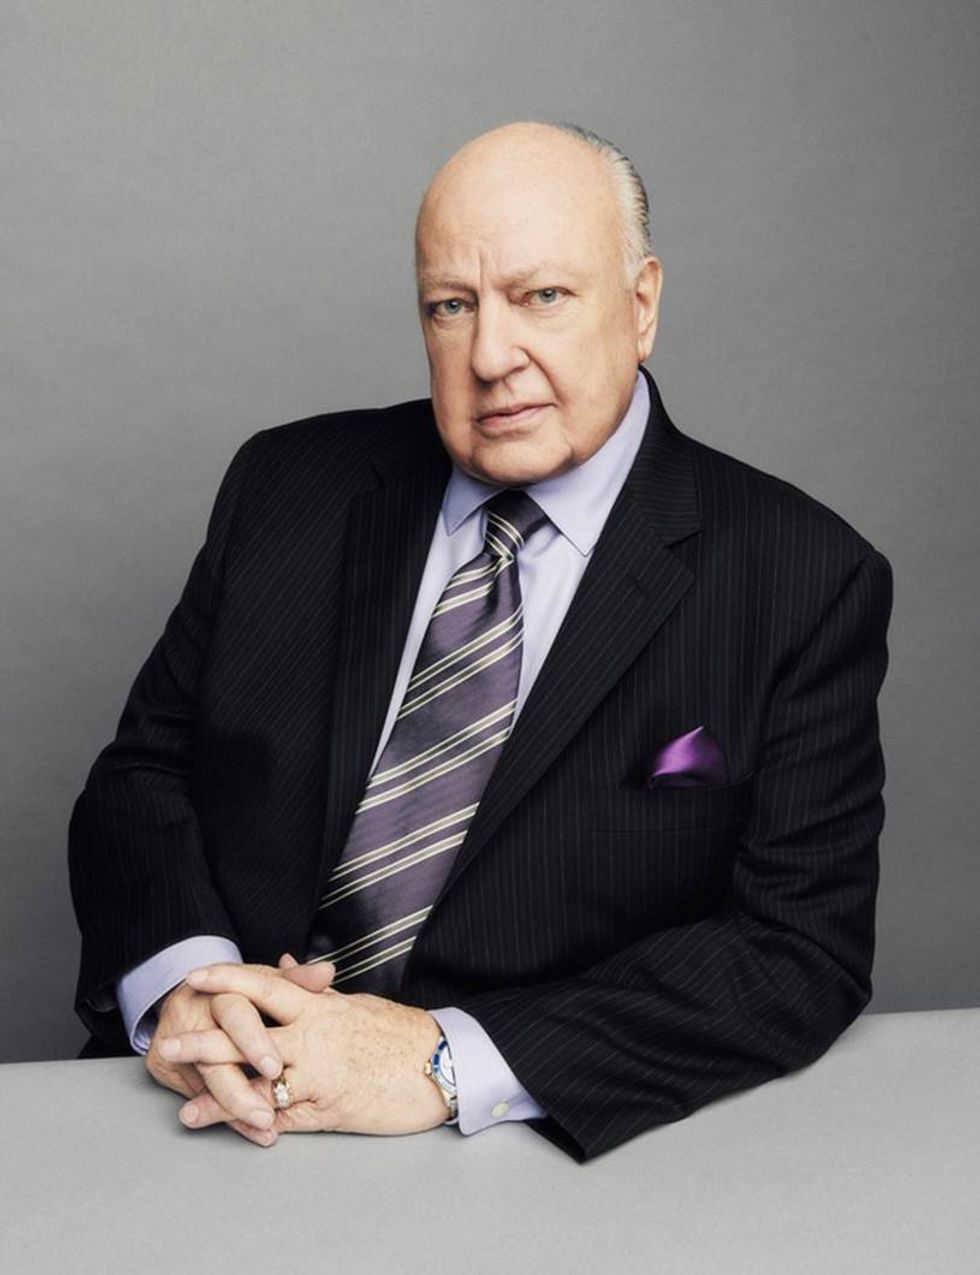 Roger Ailes Shares Details of His Blunt Conversation With Donald Trump During Megyn Kelly Feud: 'What the Hell Is Wrong With You?